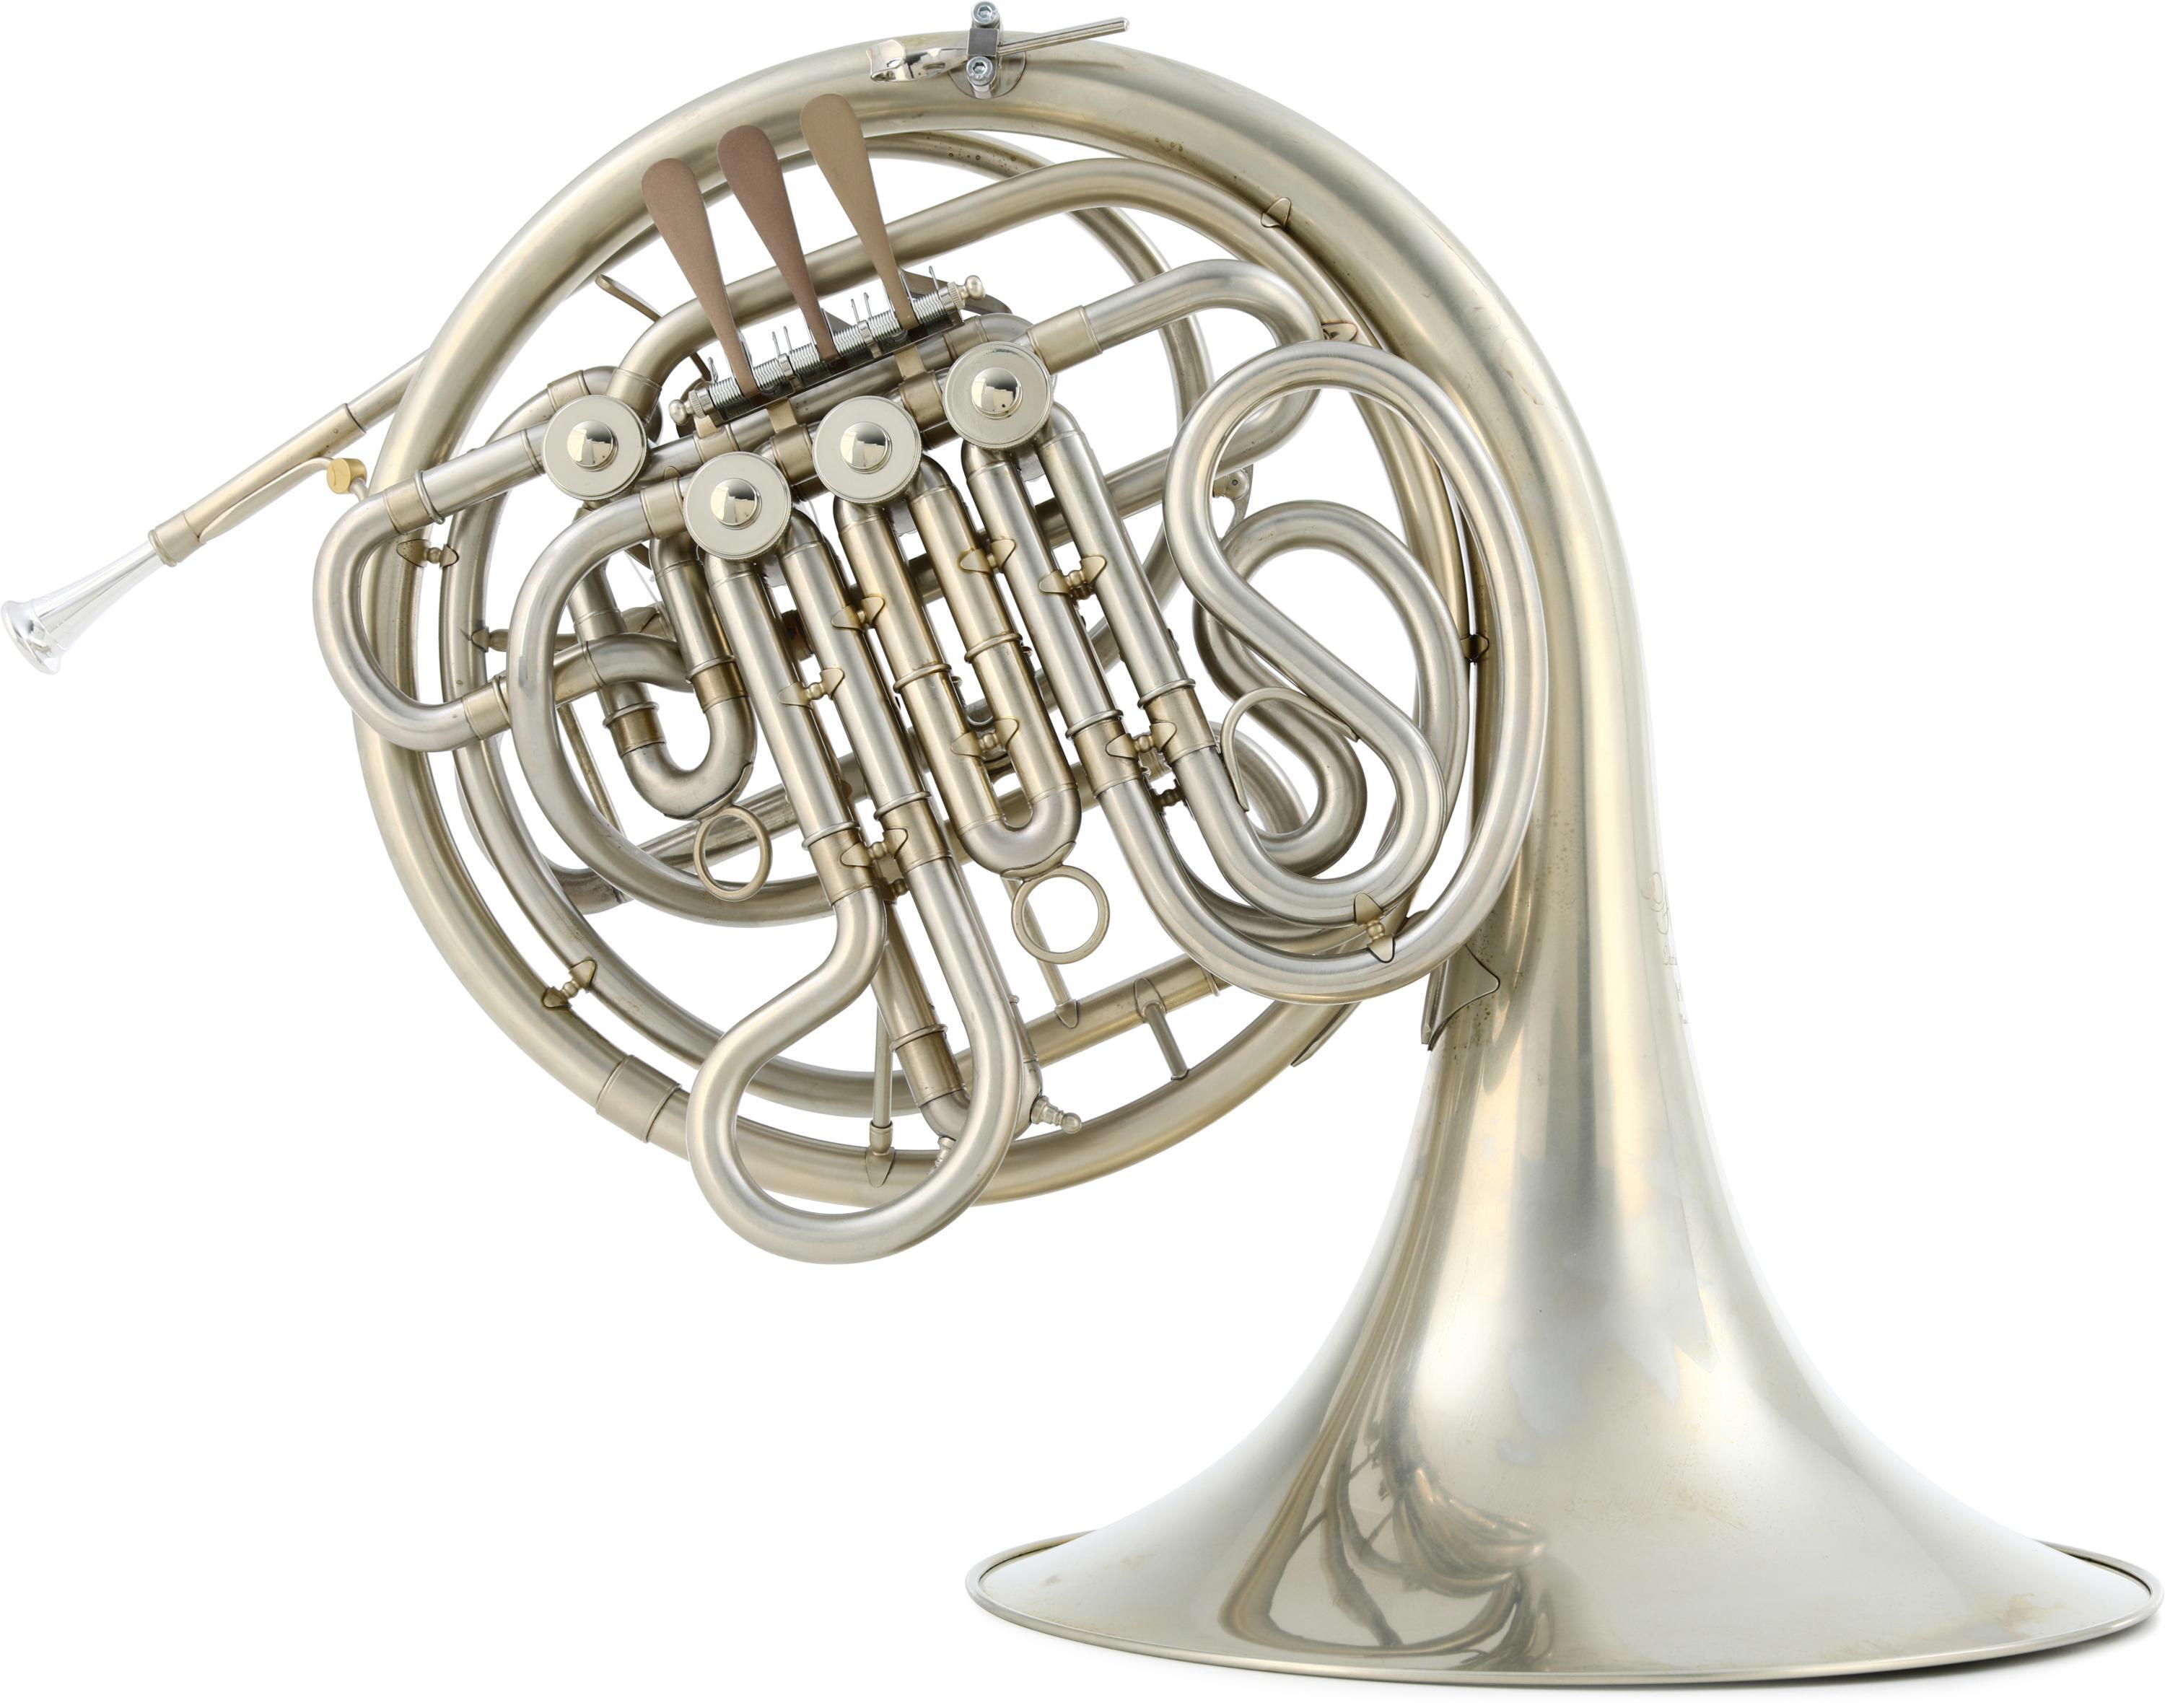 Holton H179 Farkas Professional Double French Horn - Unlacquered